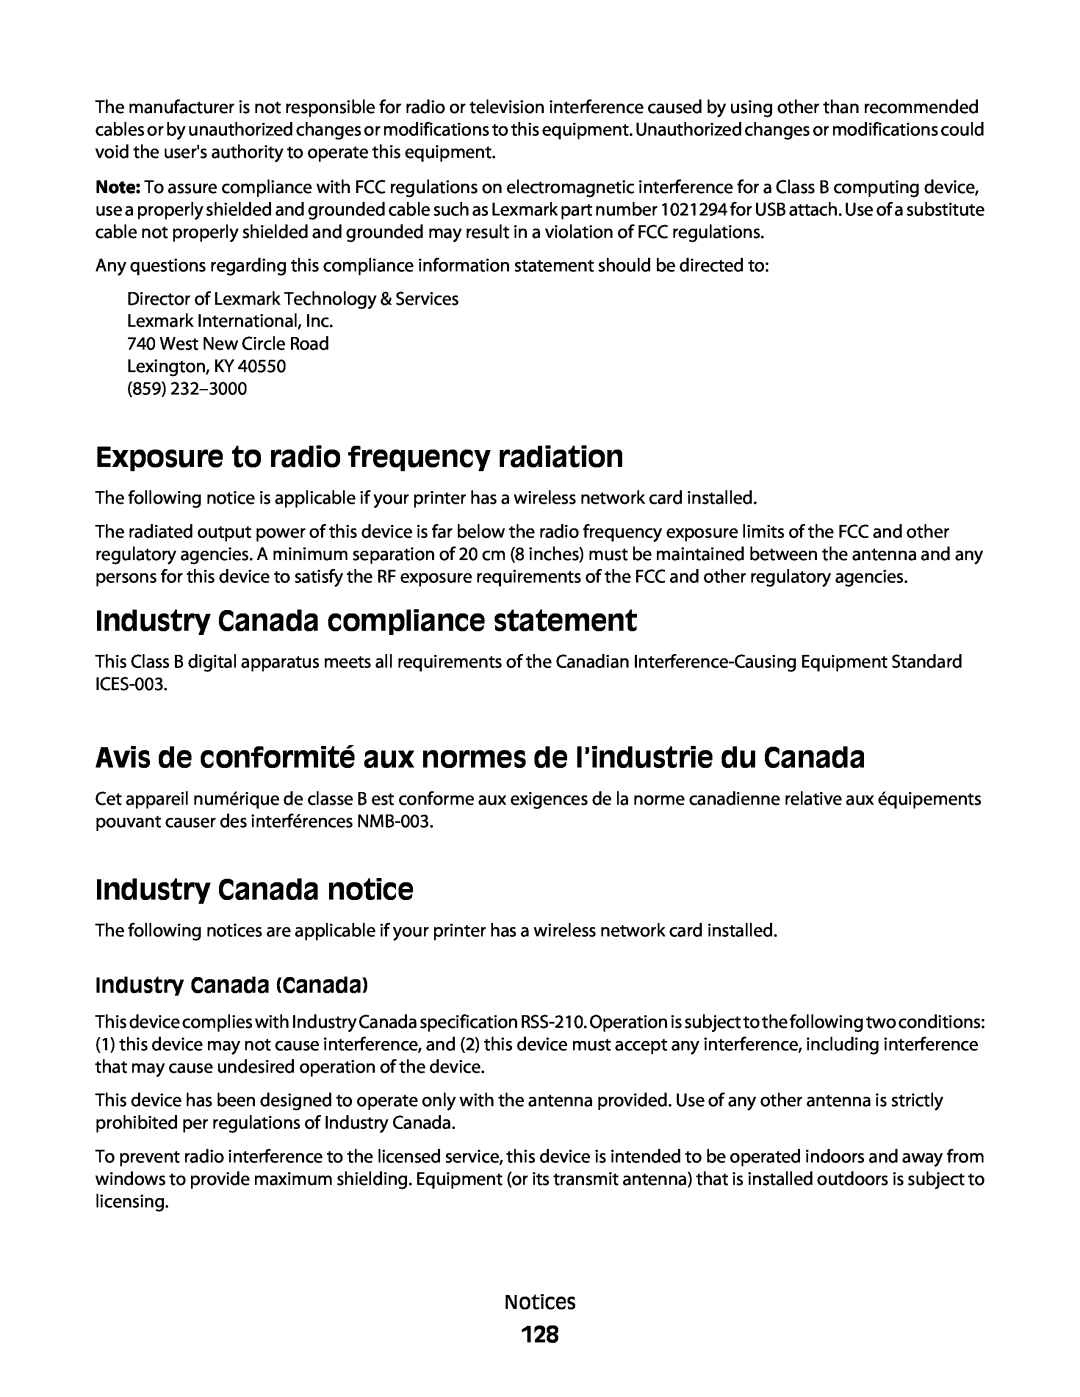 Lexmark 4600, 3600 Exposure to radio frequency radiation, Industry Canada compliance statement, Industry Canada notice 